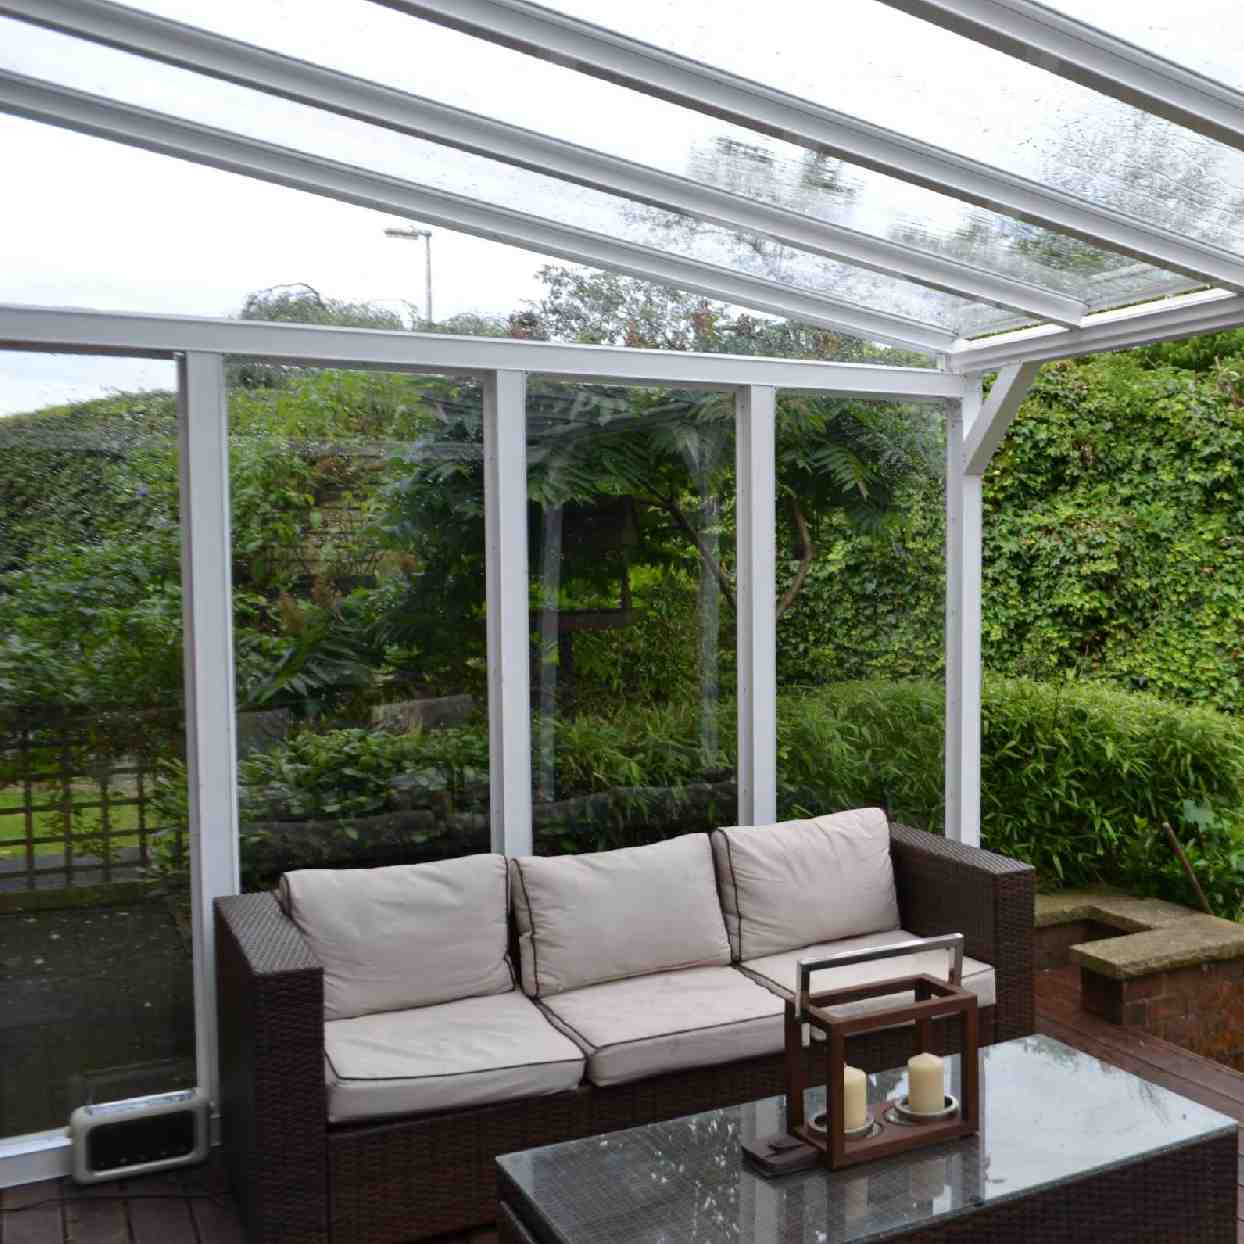 Buy Omega Verandah White with 16mm Polycarbonate Glazing - 4.2m (W) x 3.0m (P), (3) Supporting Posts online today